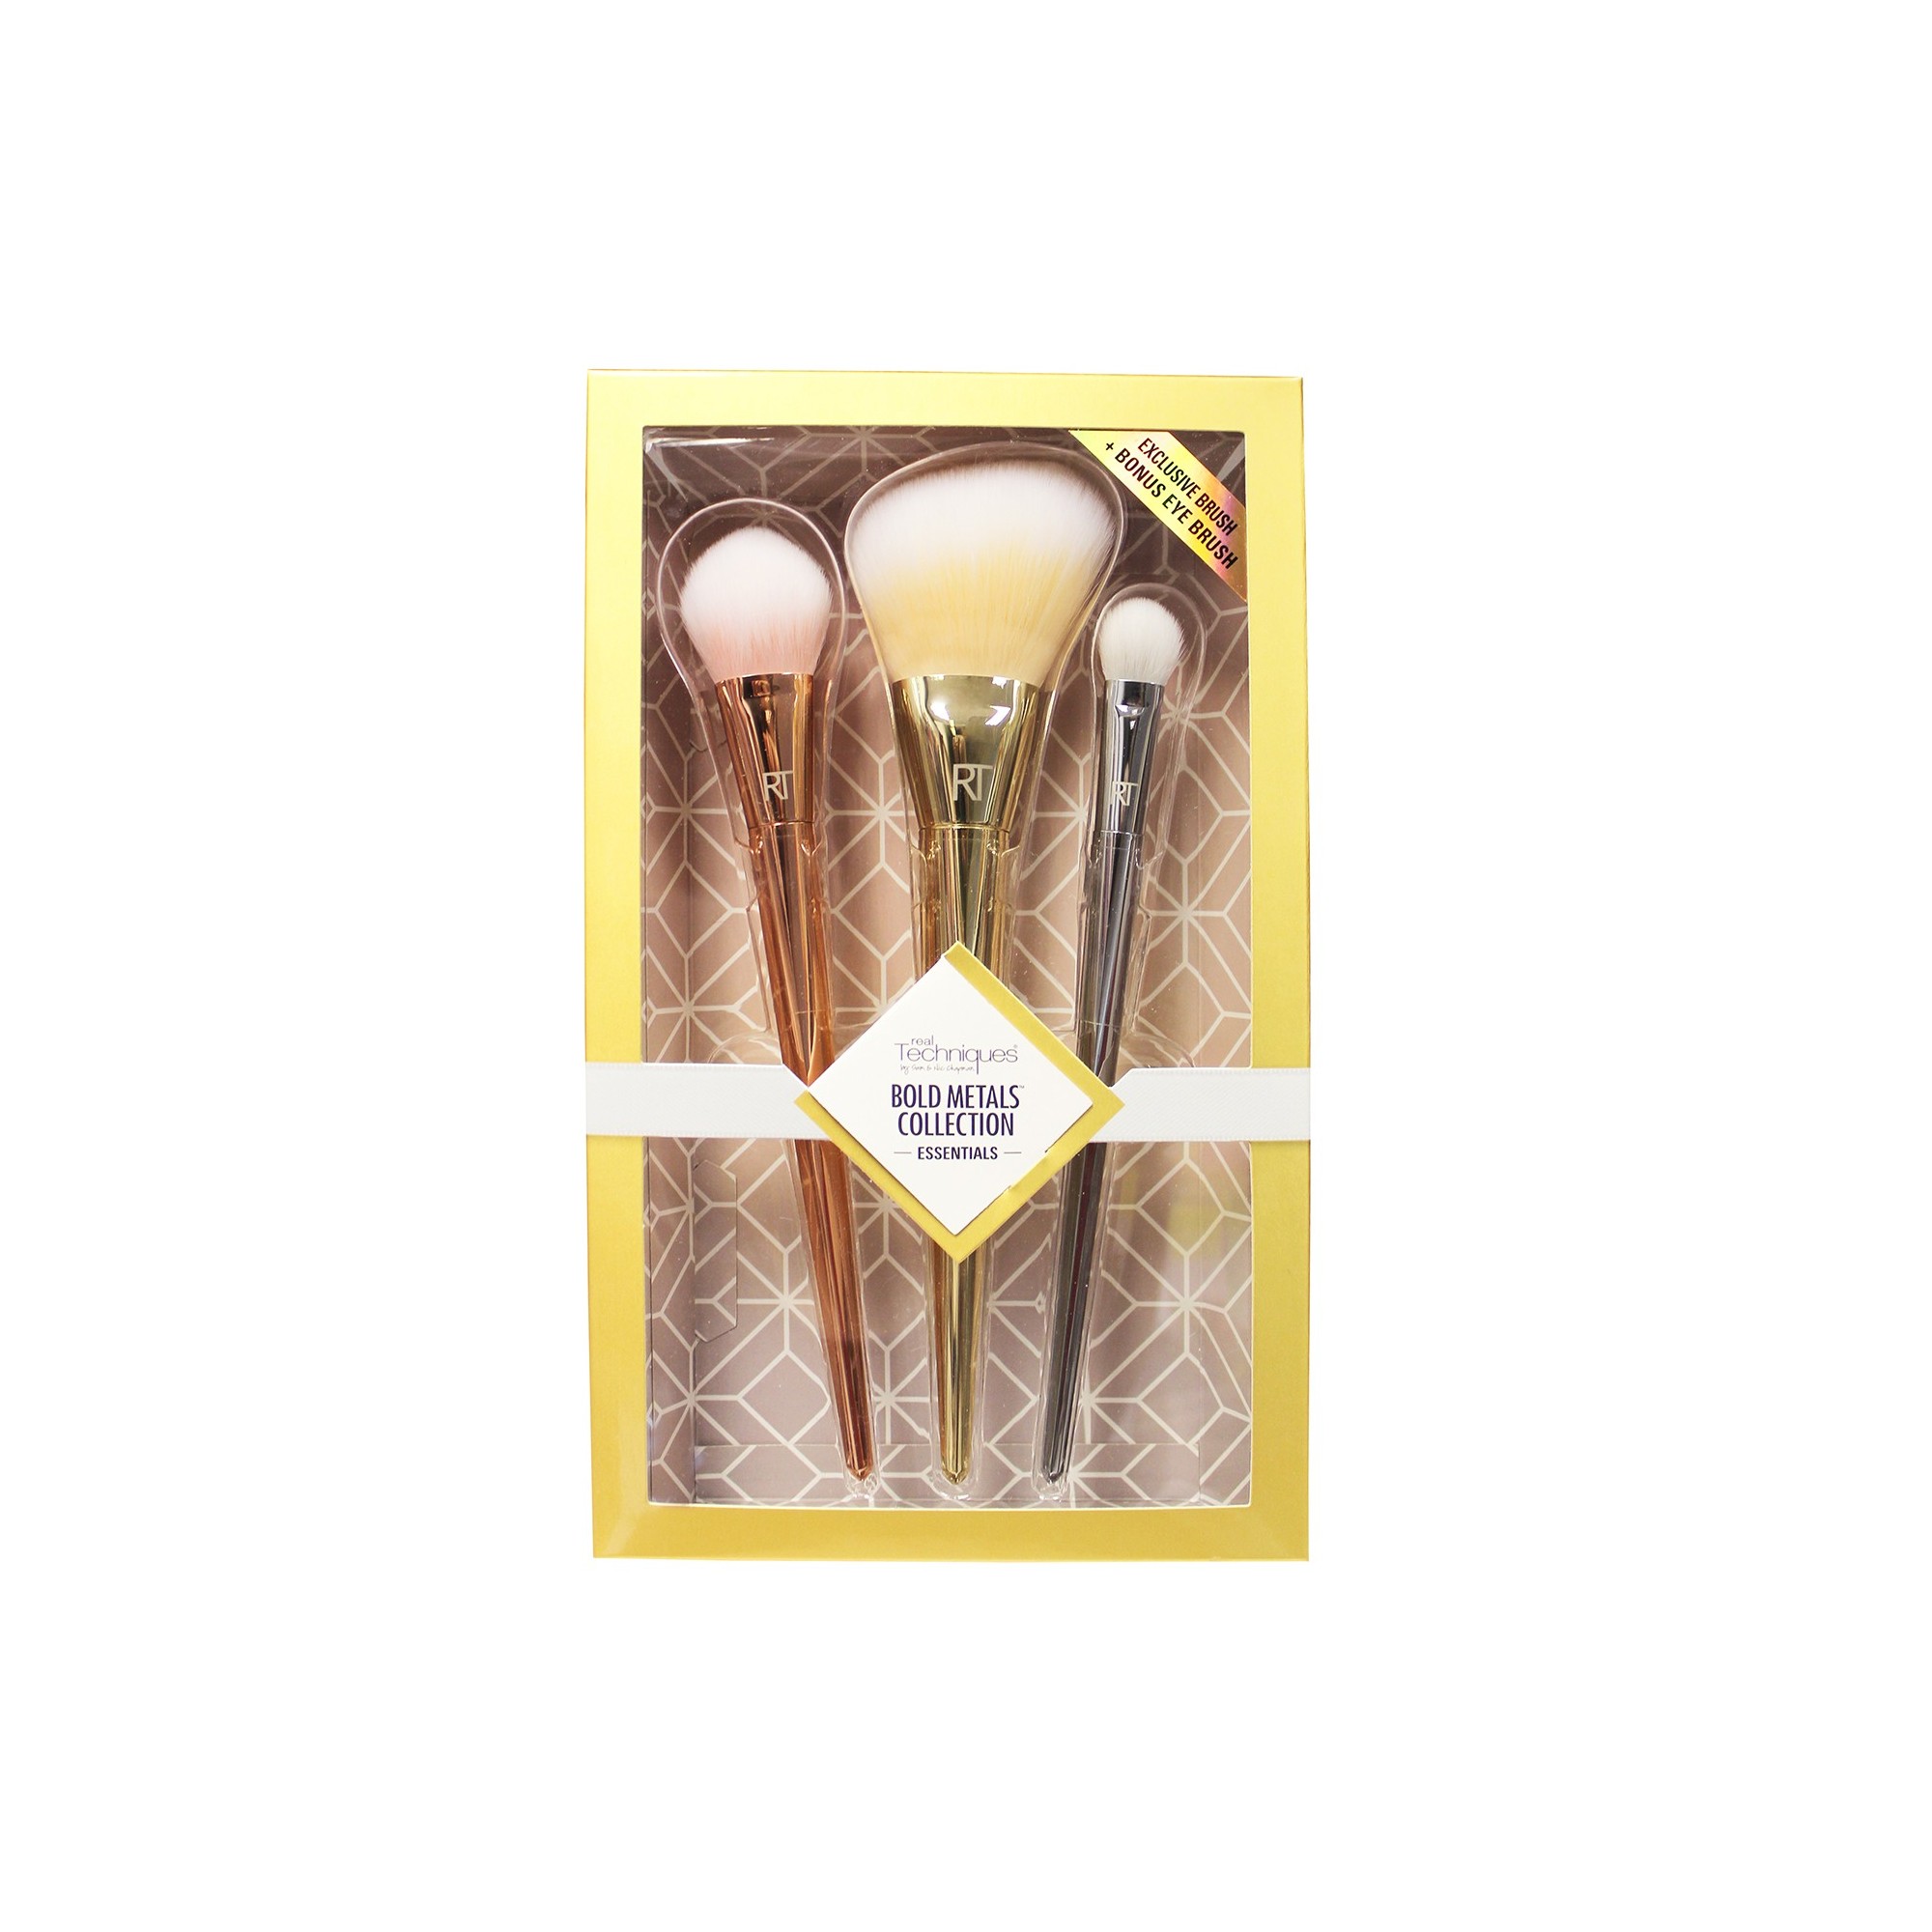 Real Techniques Bold Metals Collection Essentials Brush Set